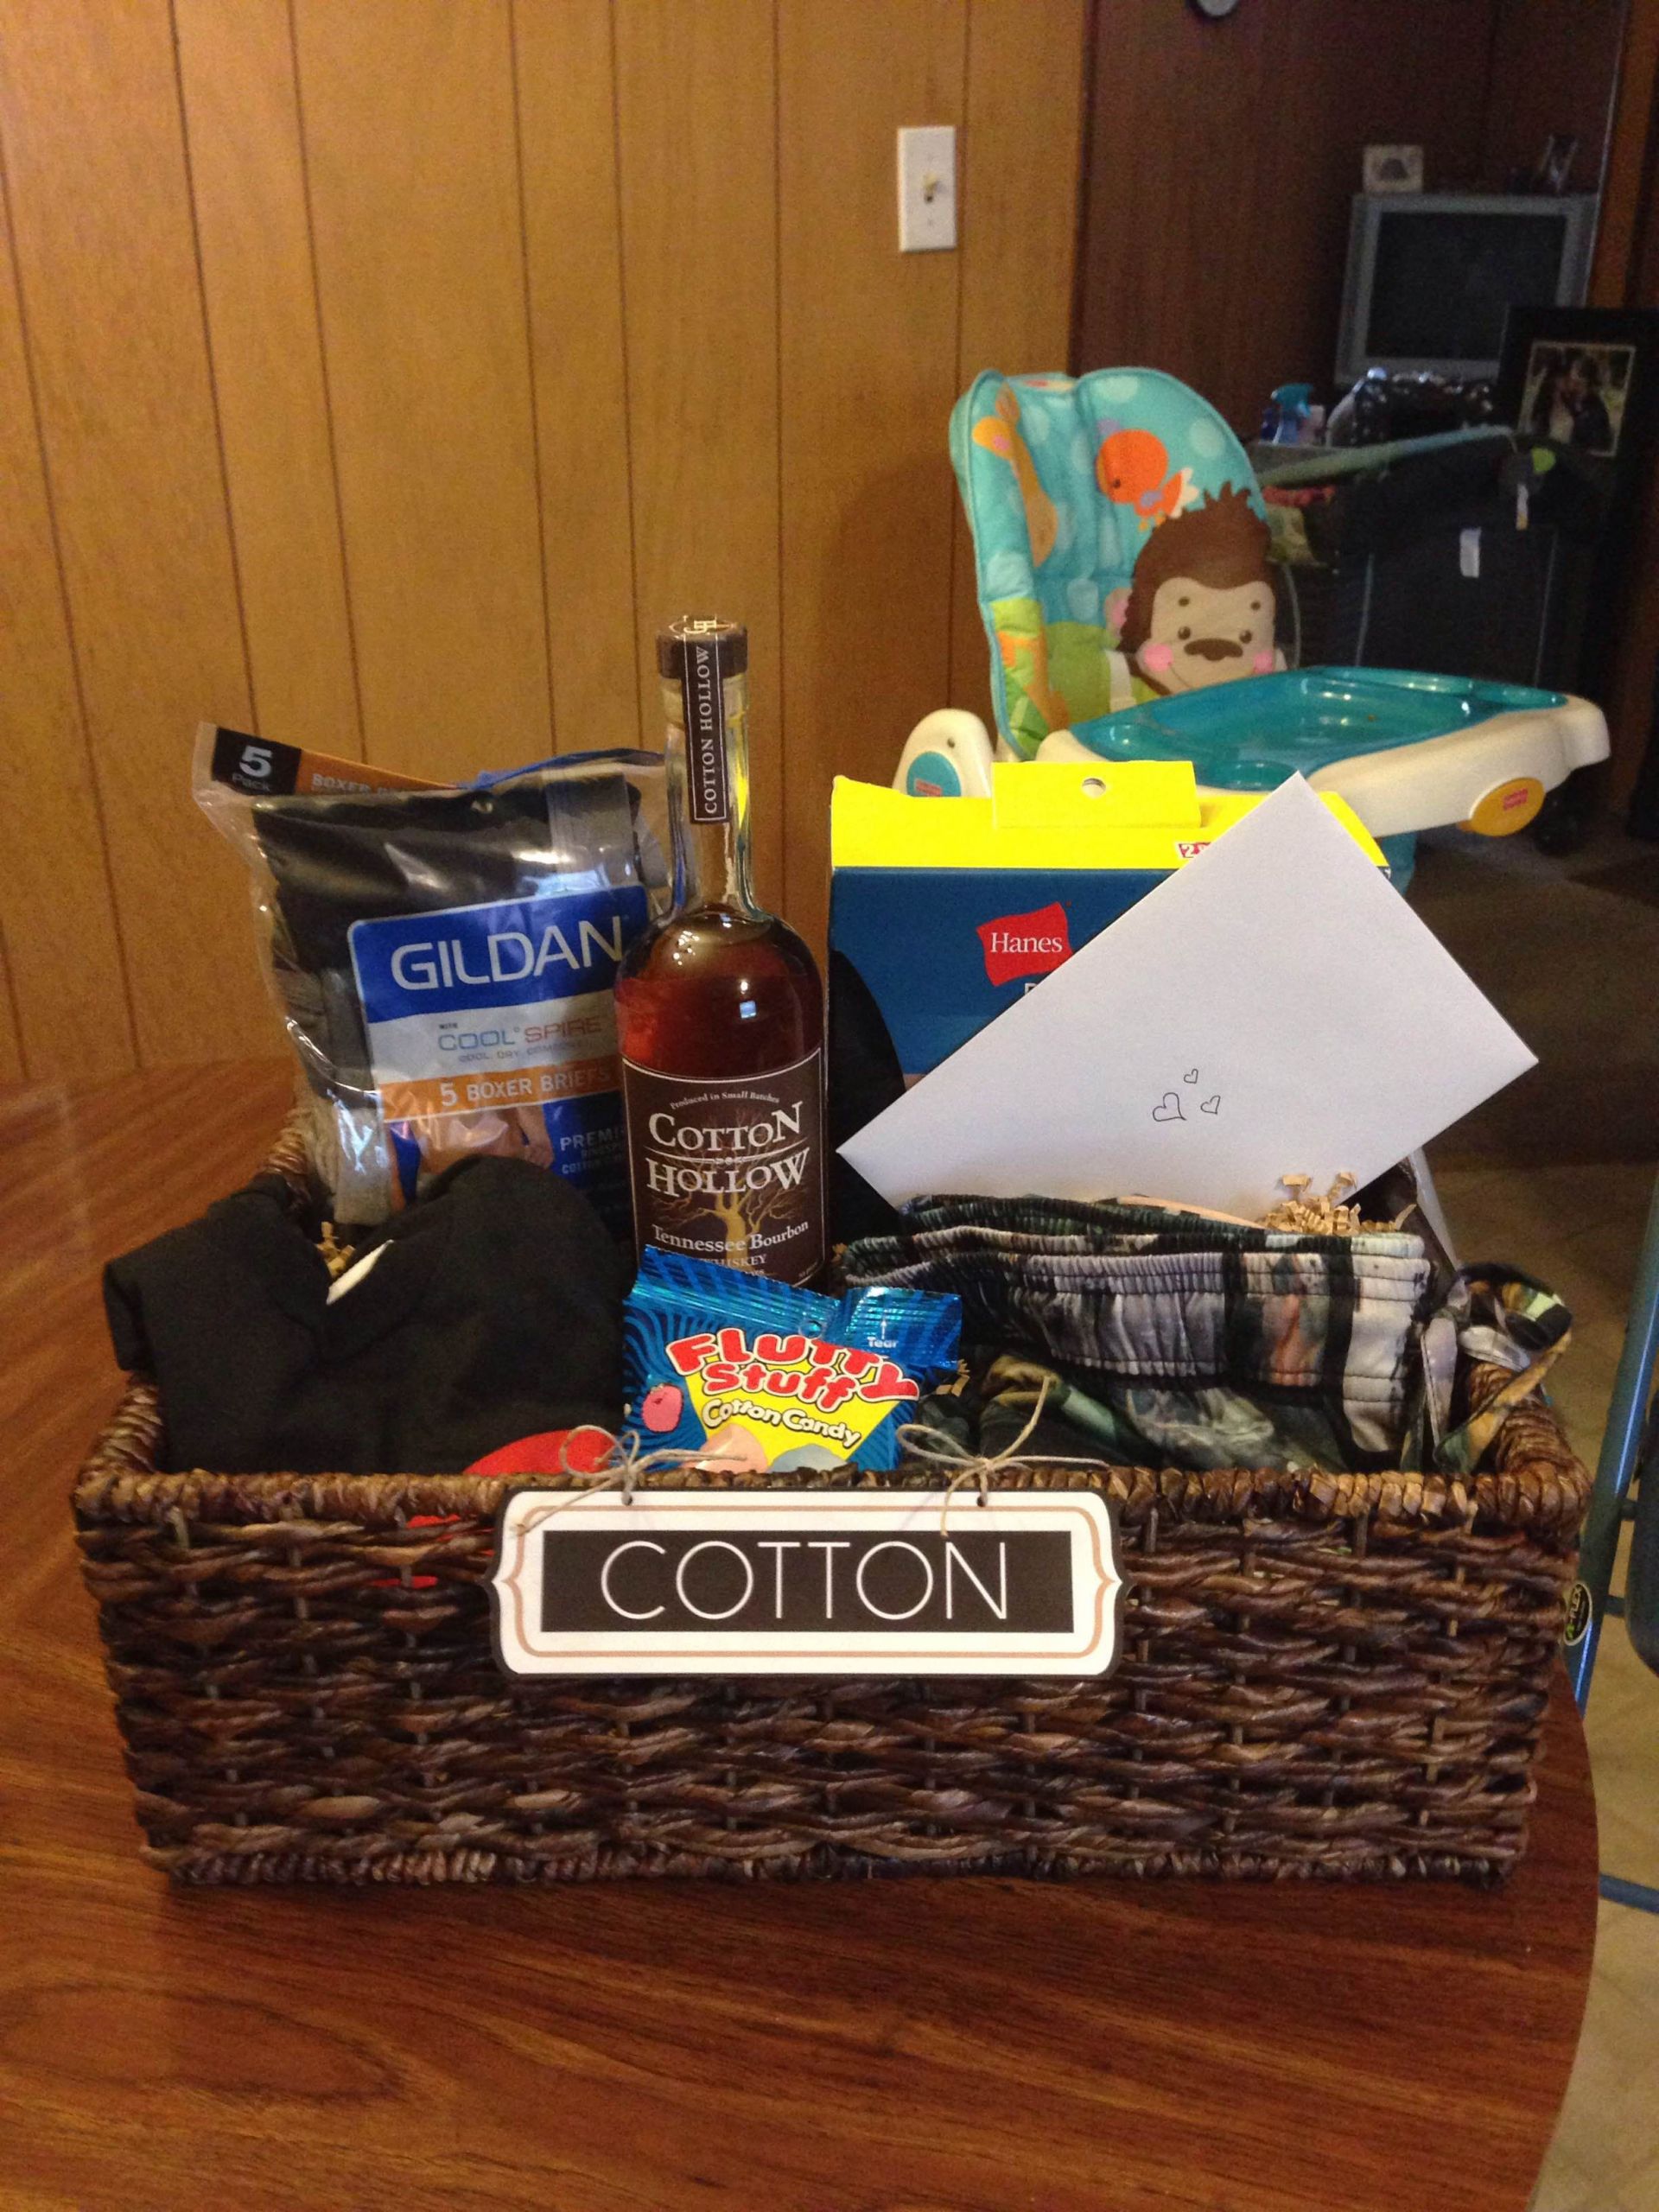 Cotton Anniversary Gift Ideas
 "Cotton" t basket I put to her for my husband for our